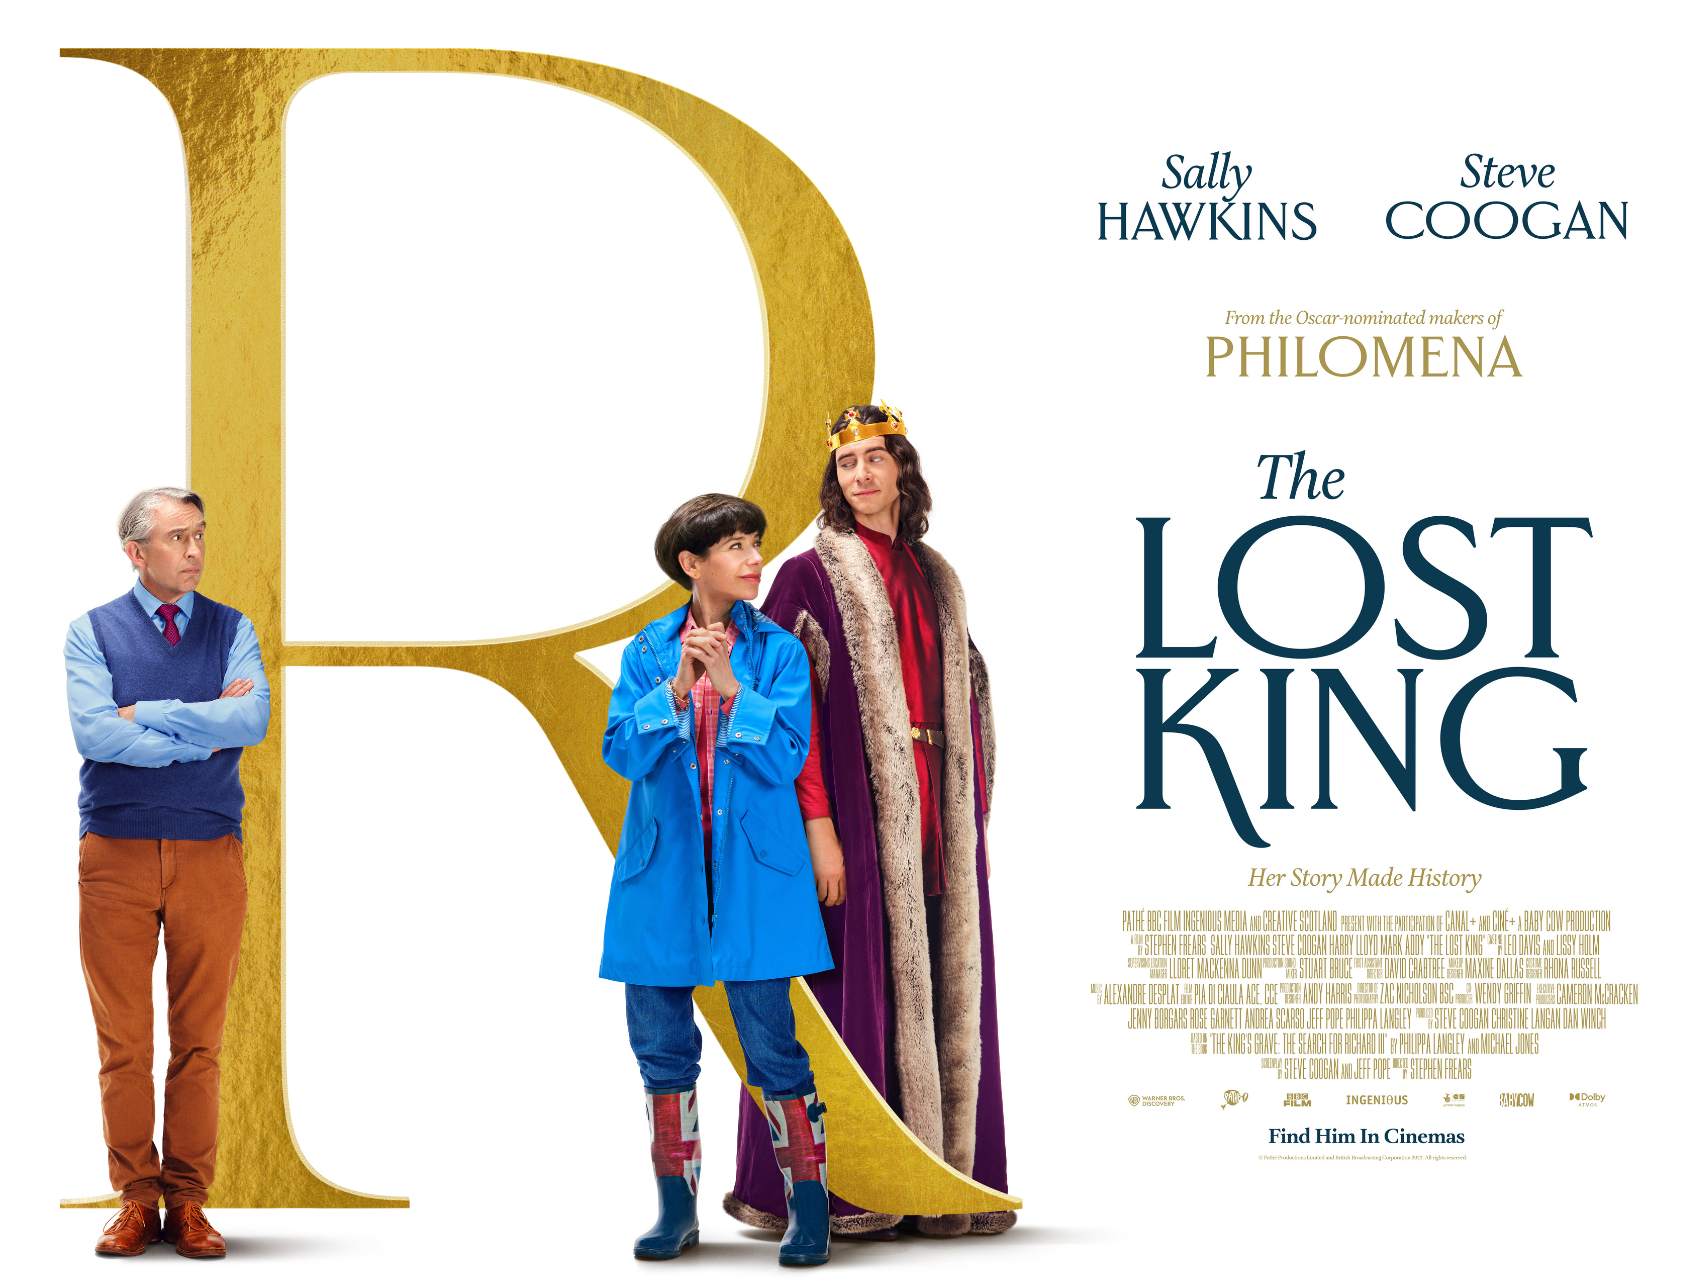 Woman in blue coat, a man with a crown, and another man stand in front of a large R. Text reads "The Lost King"